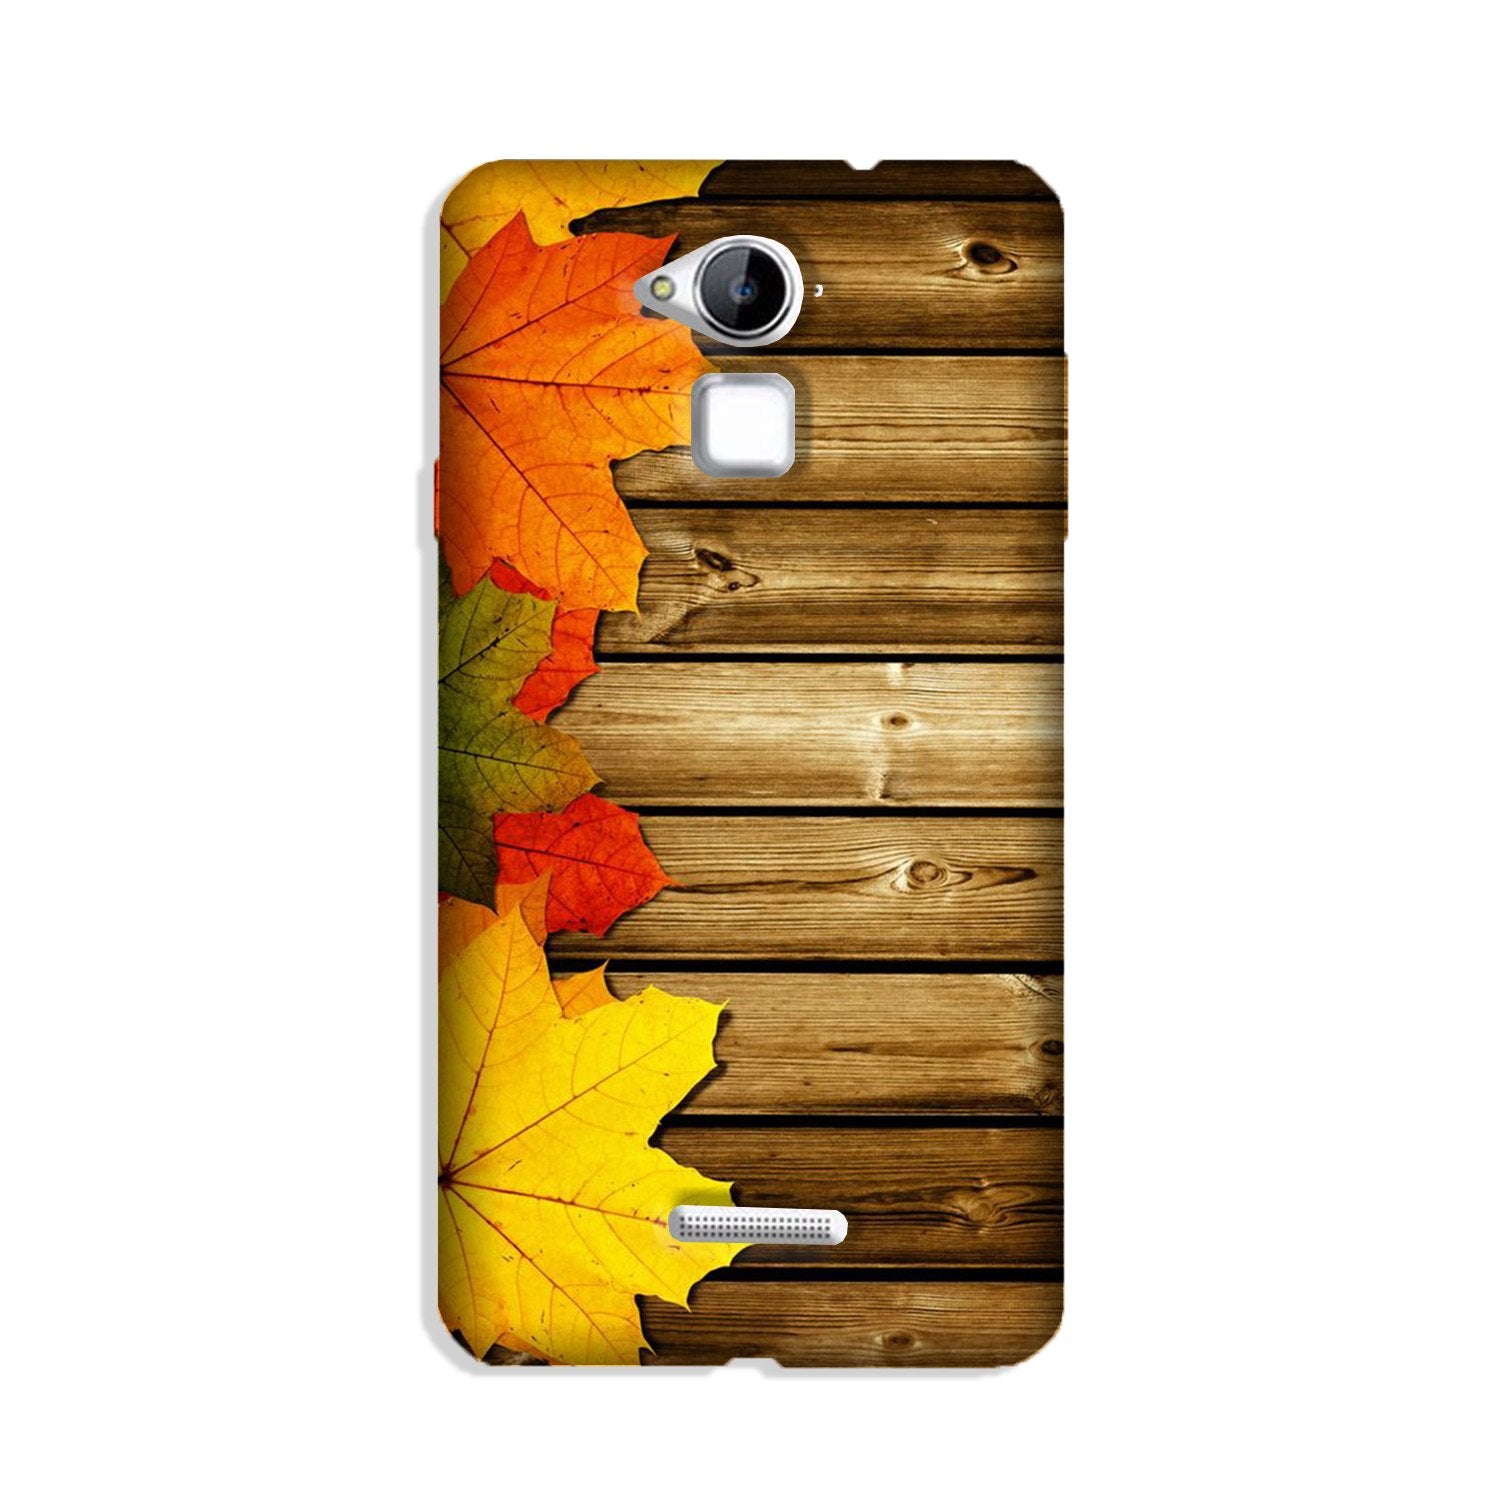 Wooden look Case for Coolpad Note 3